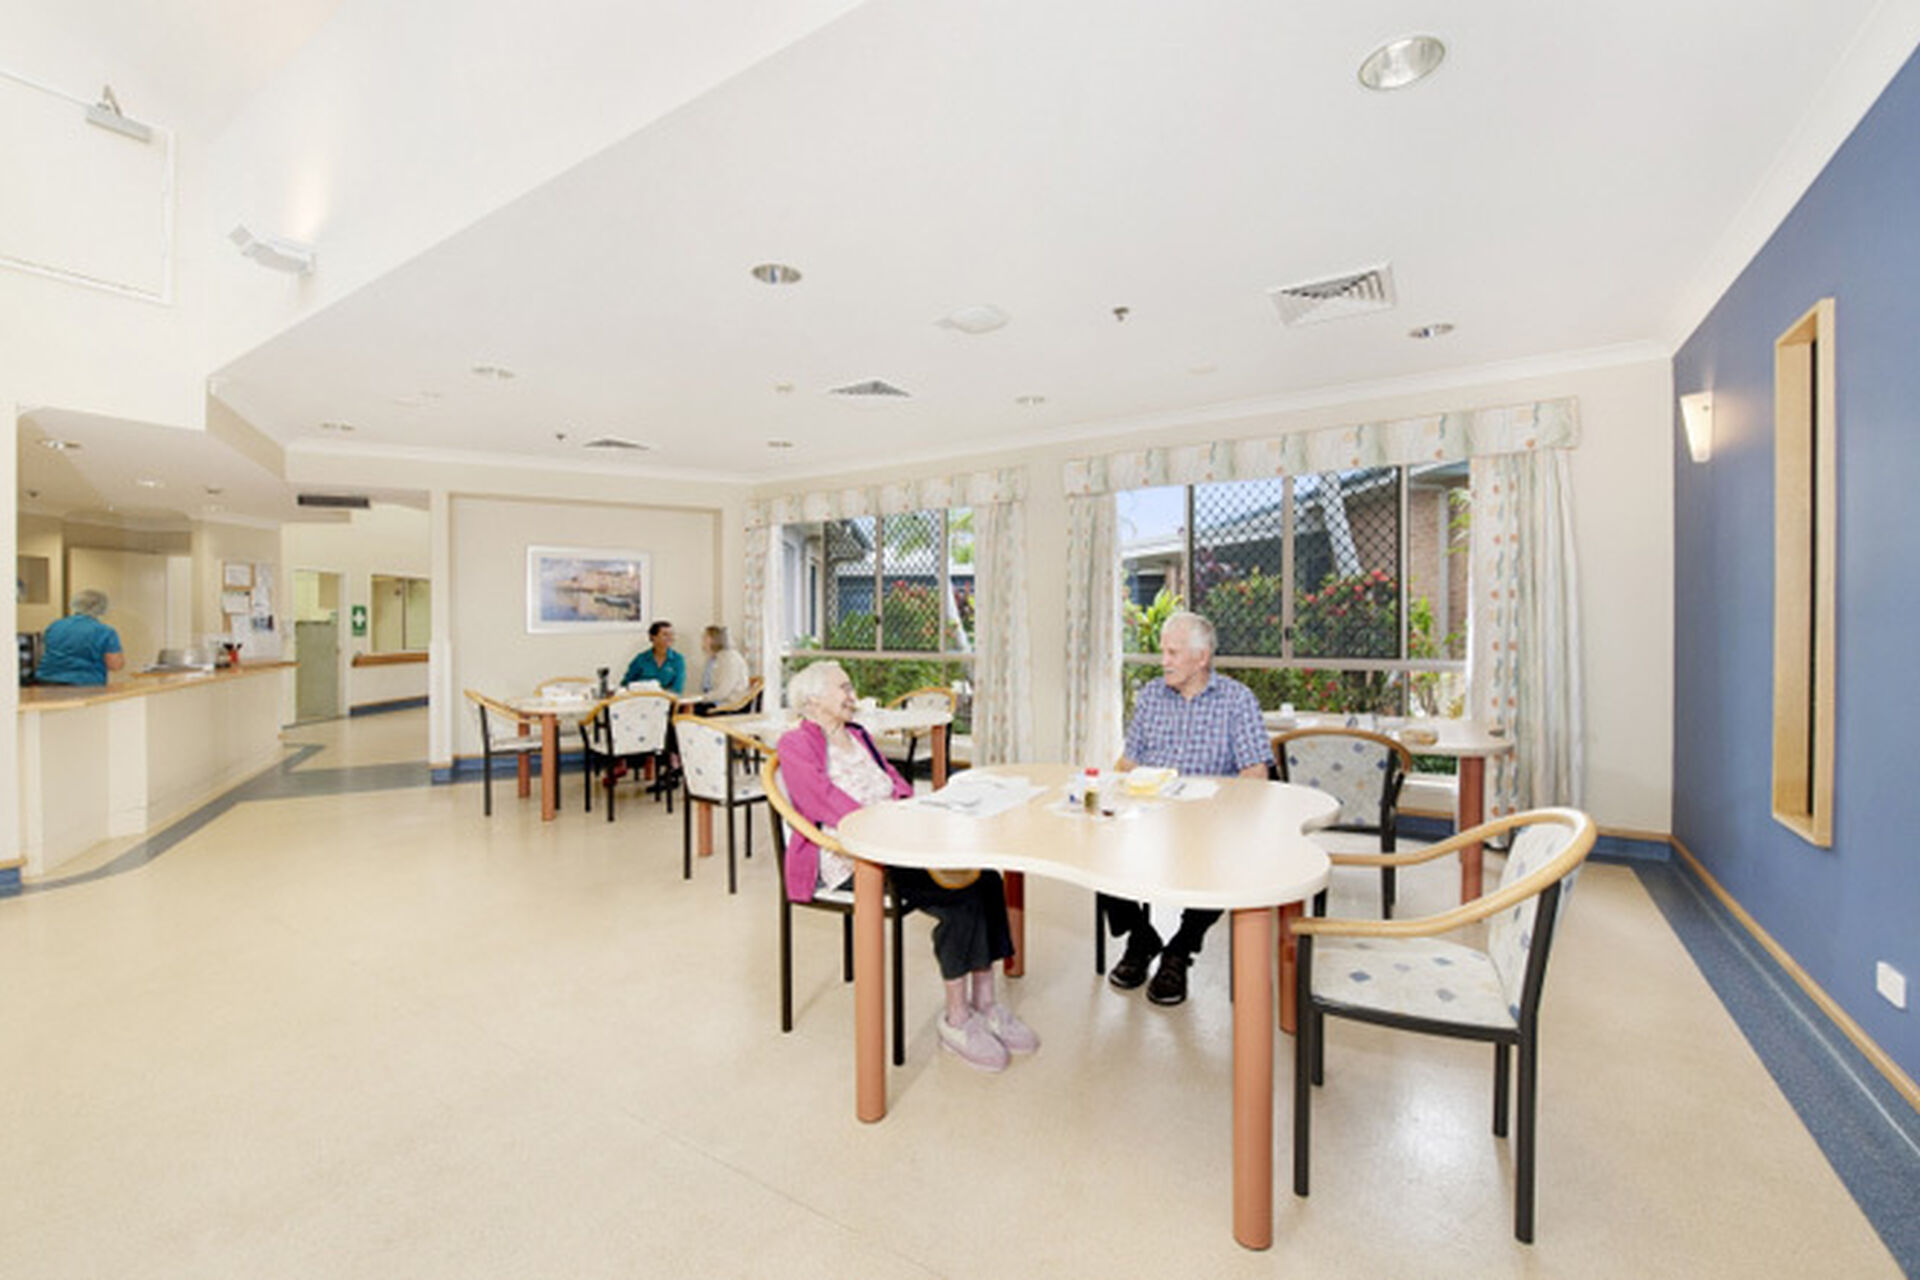 two aged care residents in the spacious dining room and sitting room at baptistcare maranoa centre aged care home in alstonville nsw far north coast